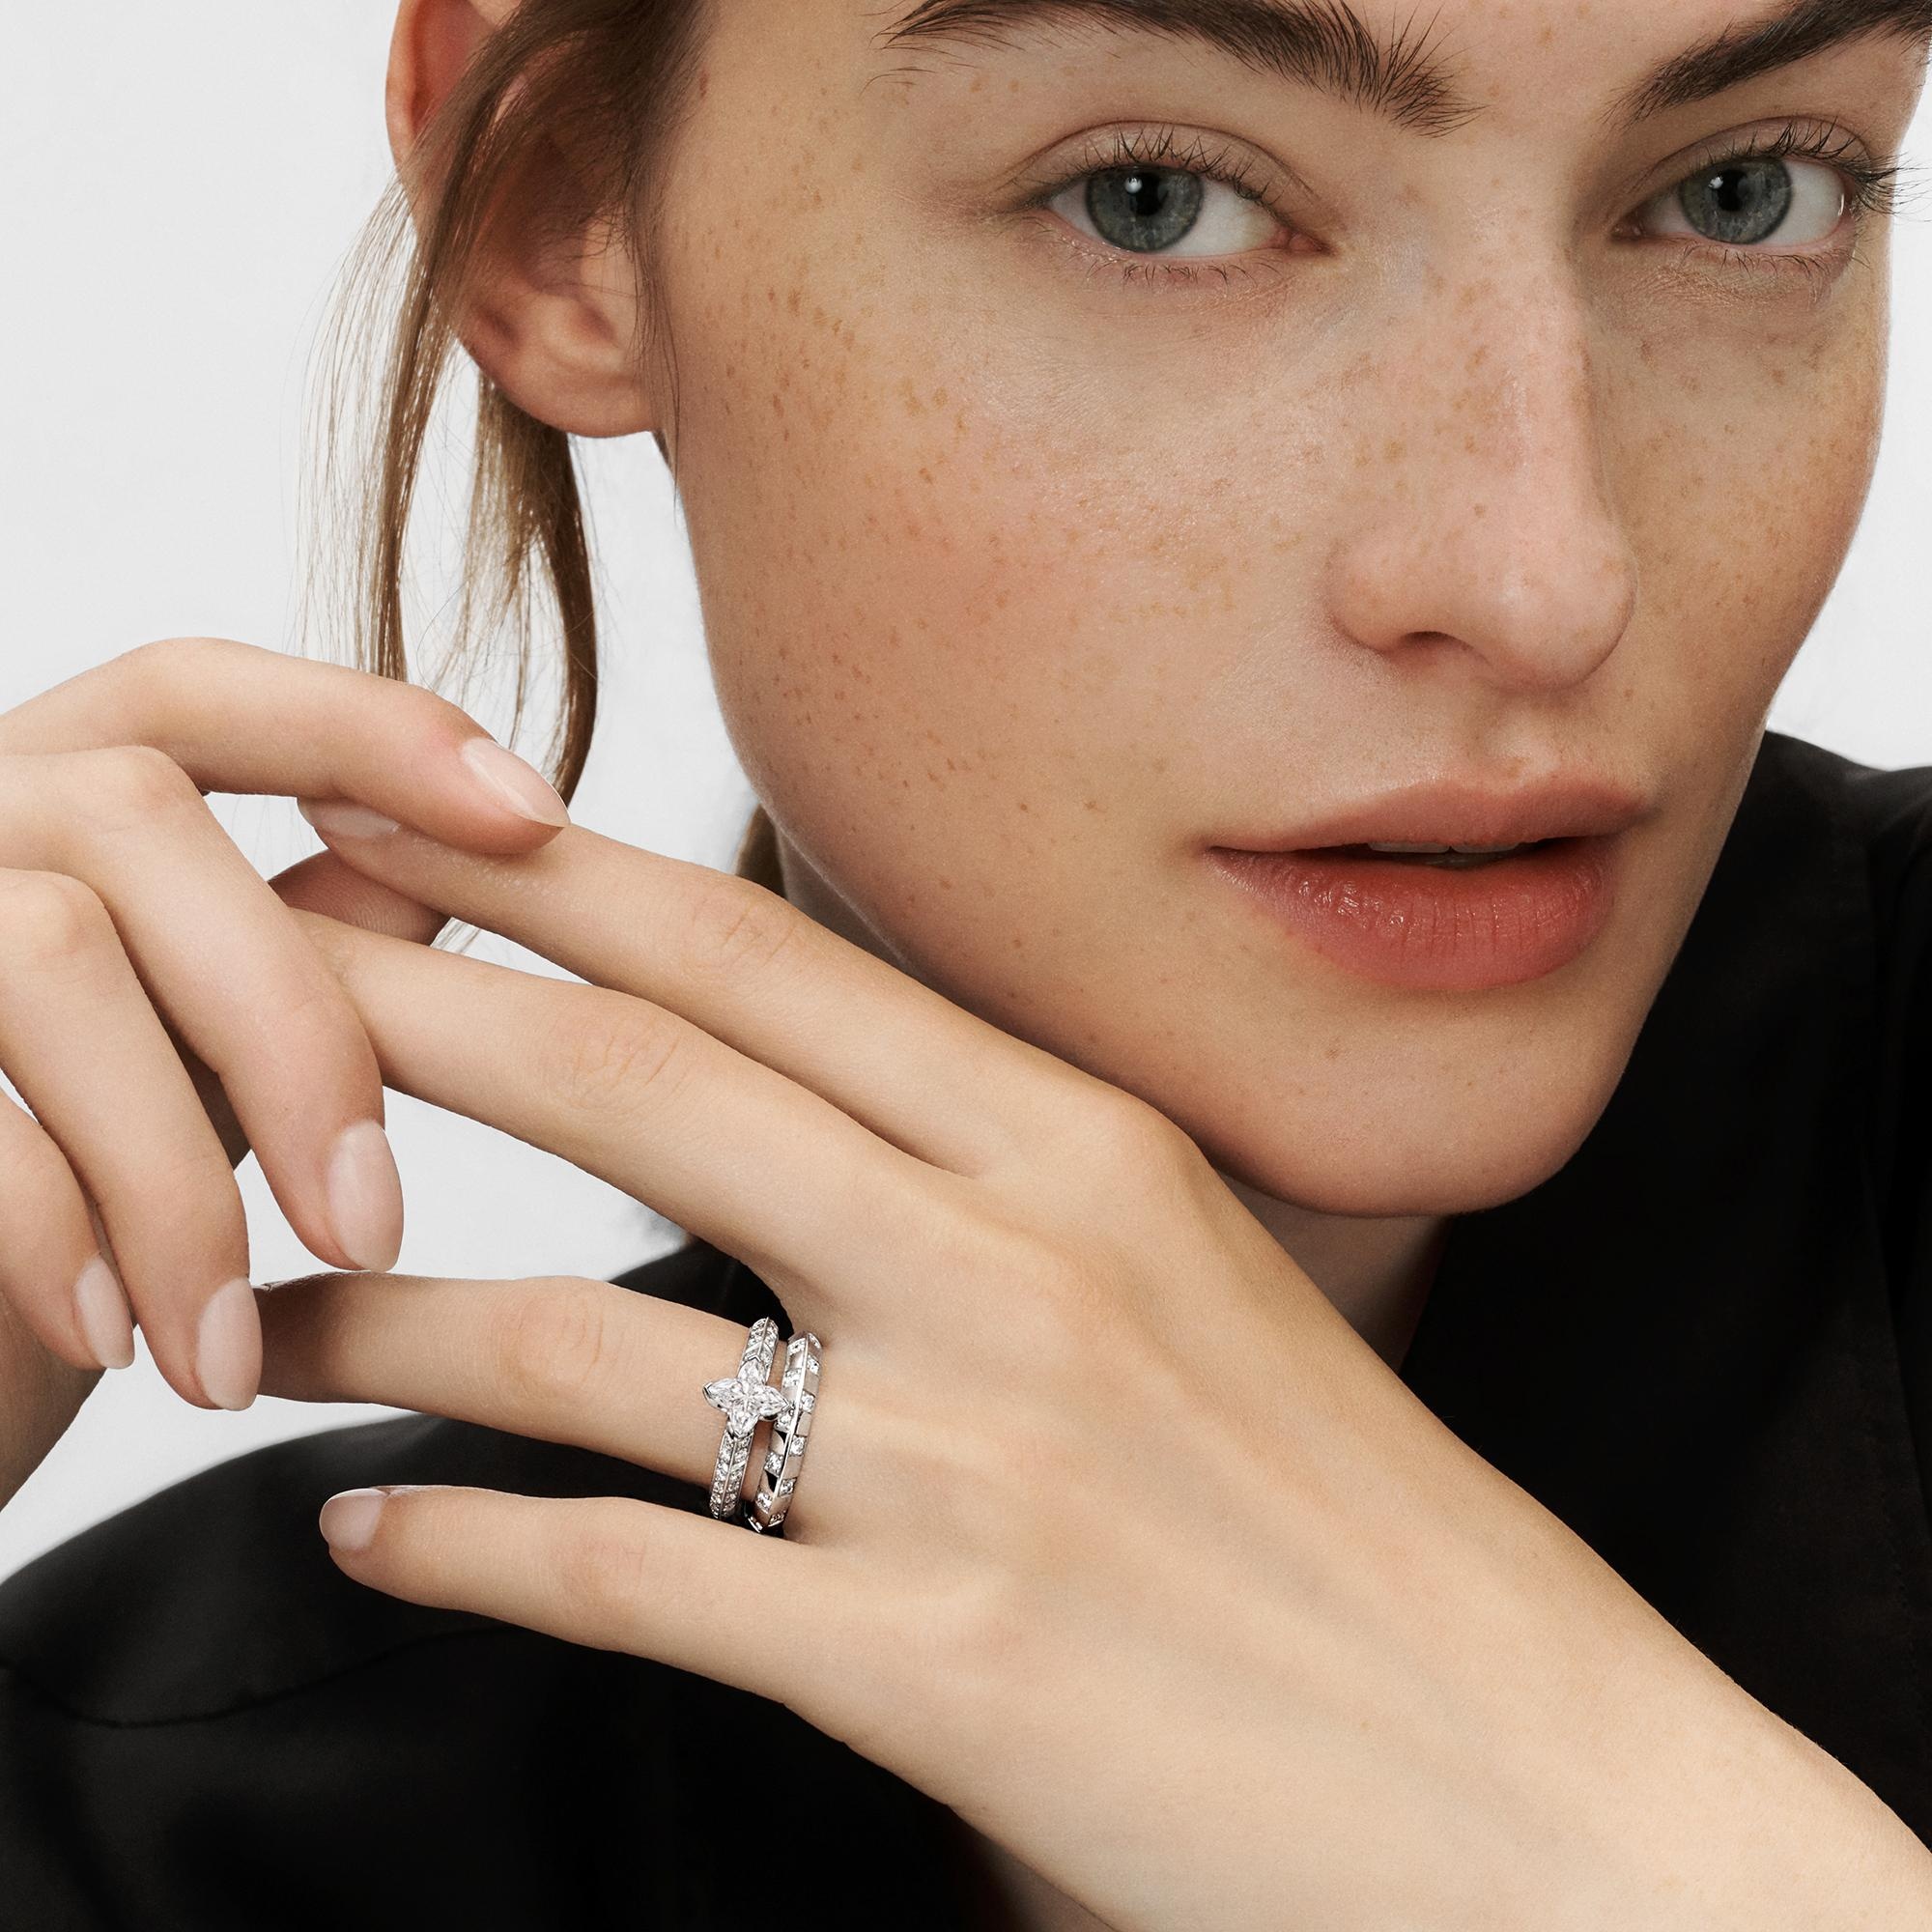 See Louis Vuitton's New Engagement Ring